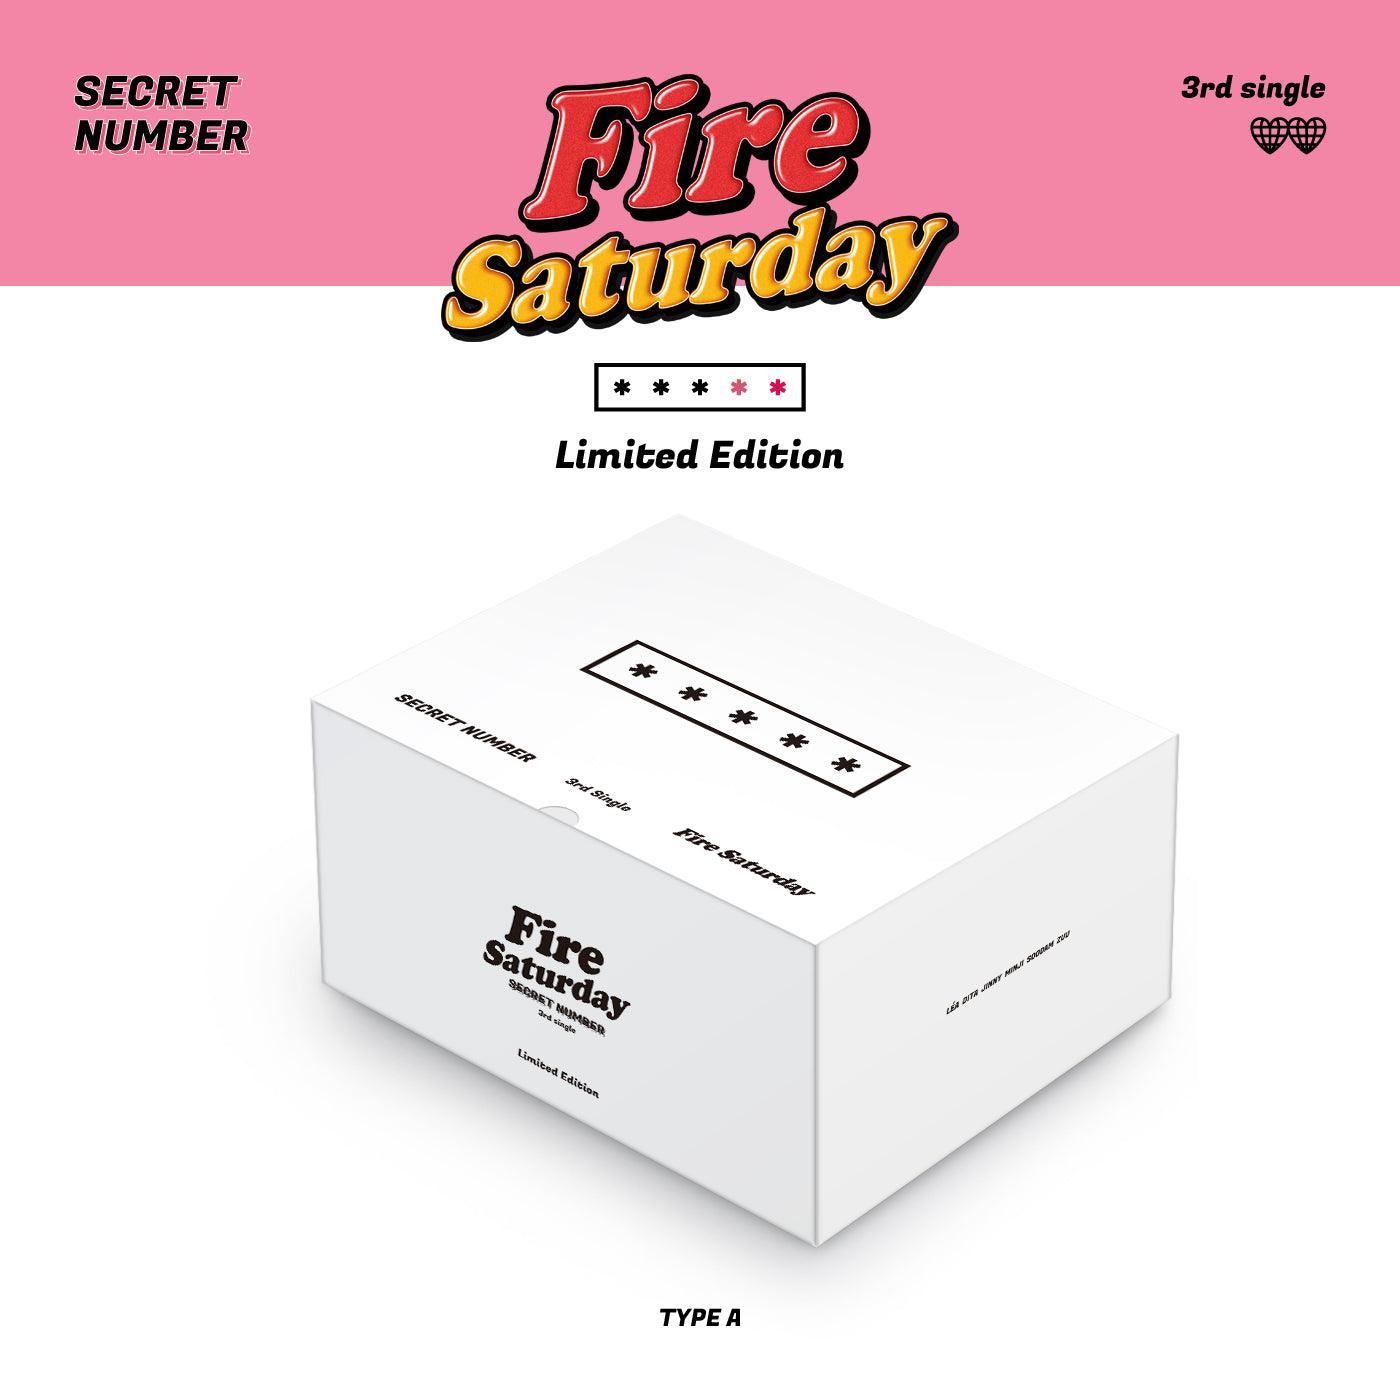 SECRET NUMBER 3RD SINGLE ALBUM 'FIRE SATURDAY' LIMITED EDITION A cover